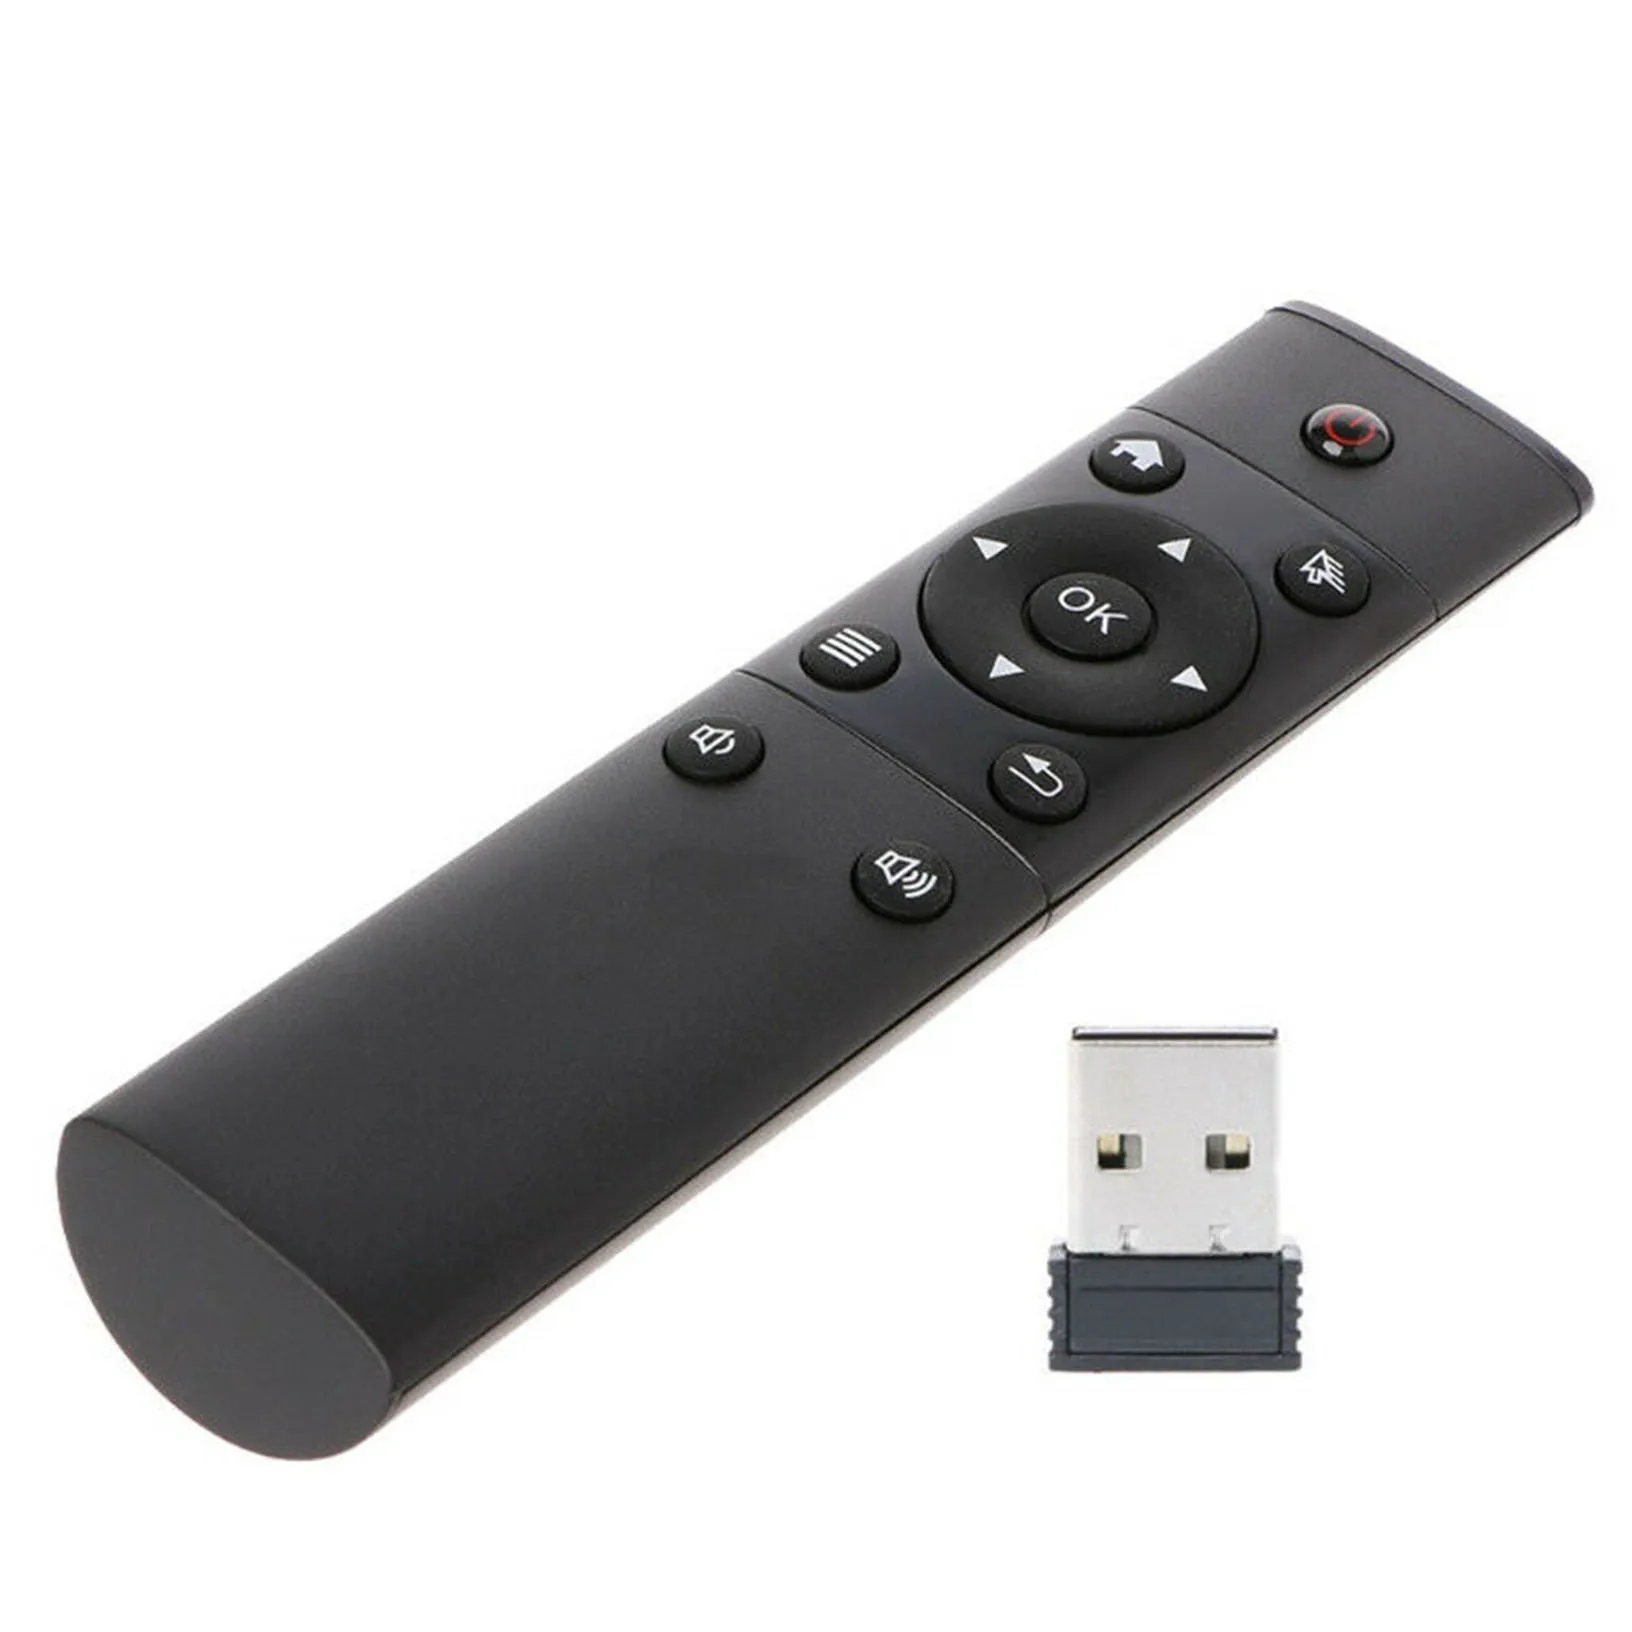 

FM4 2.4GHz Wireless Keyboard Remote Control Air Mouse For Android KODI TV Handheld Keyboard for TV BOX PC Laptop Tablet Mini PC